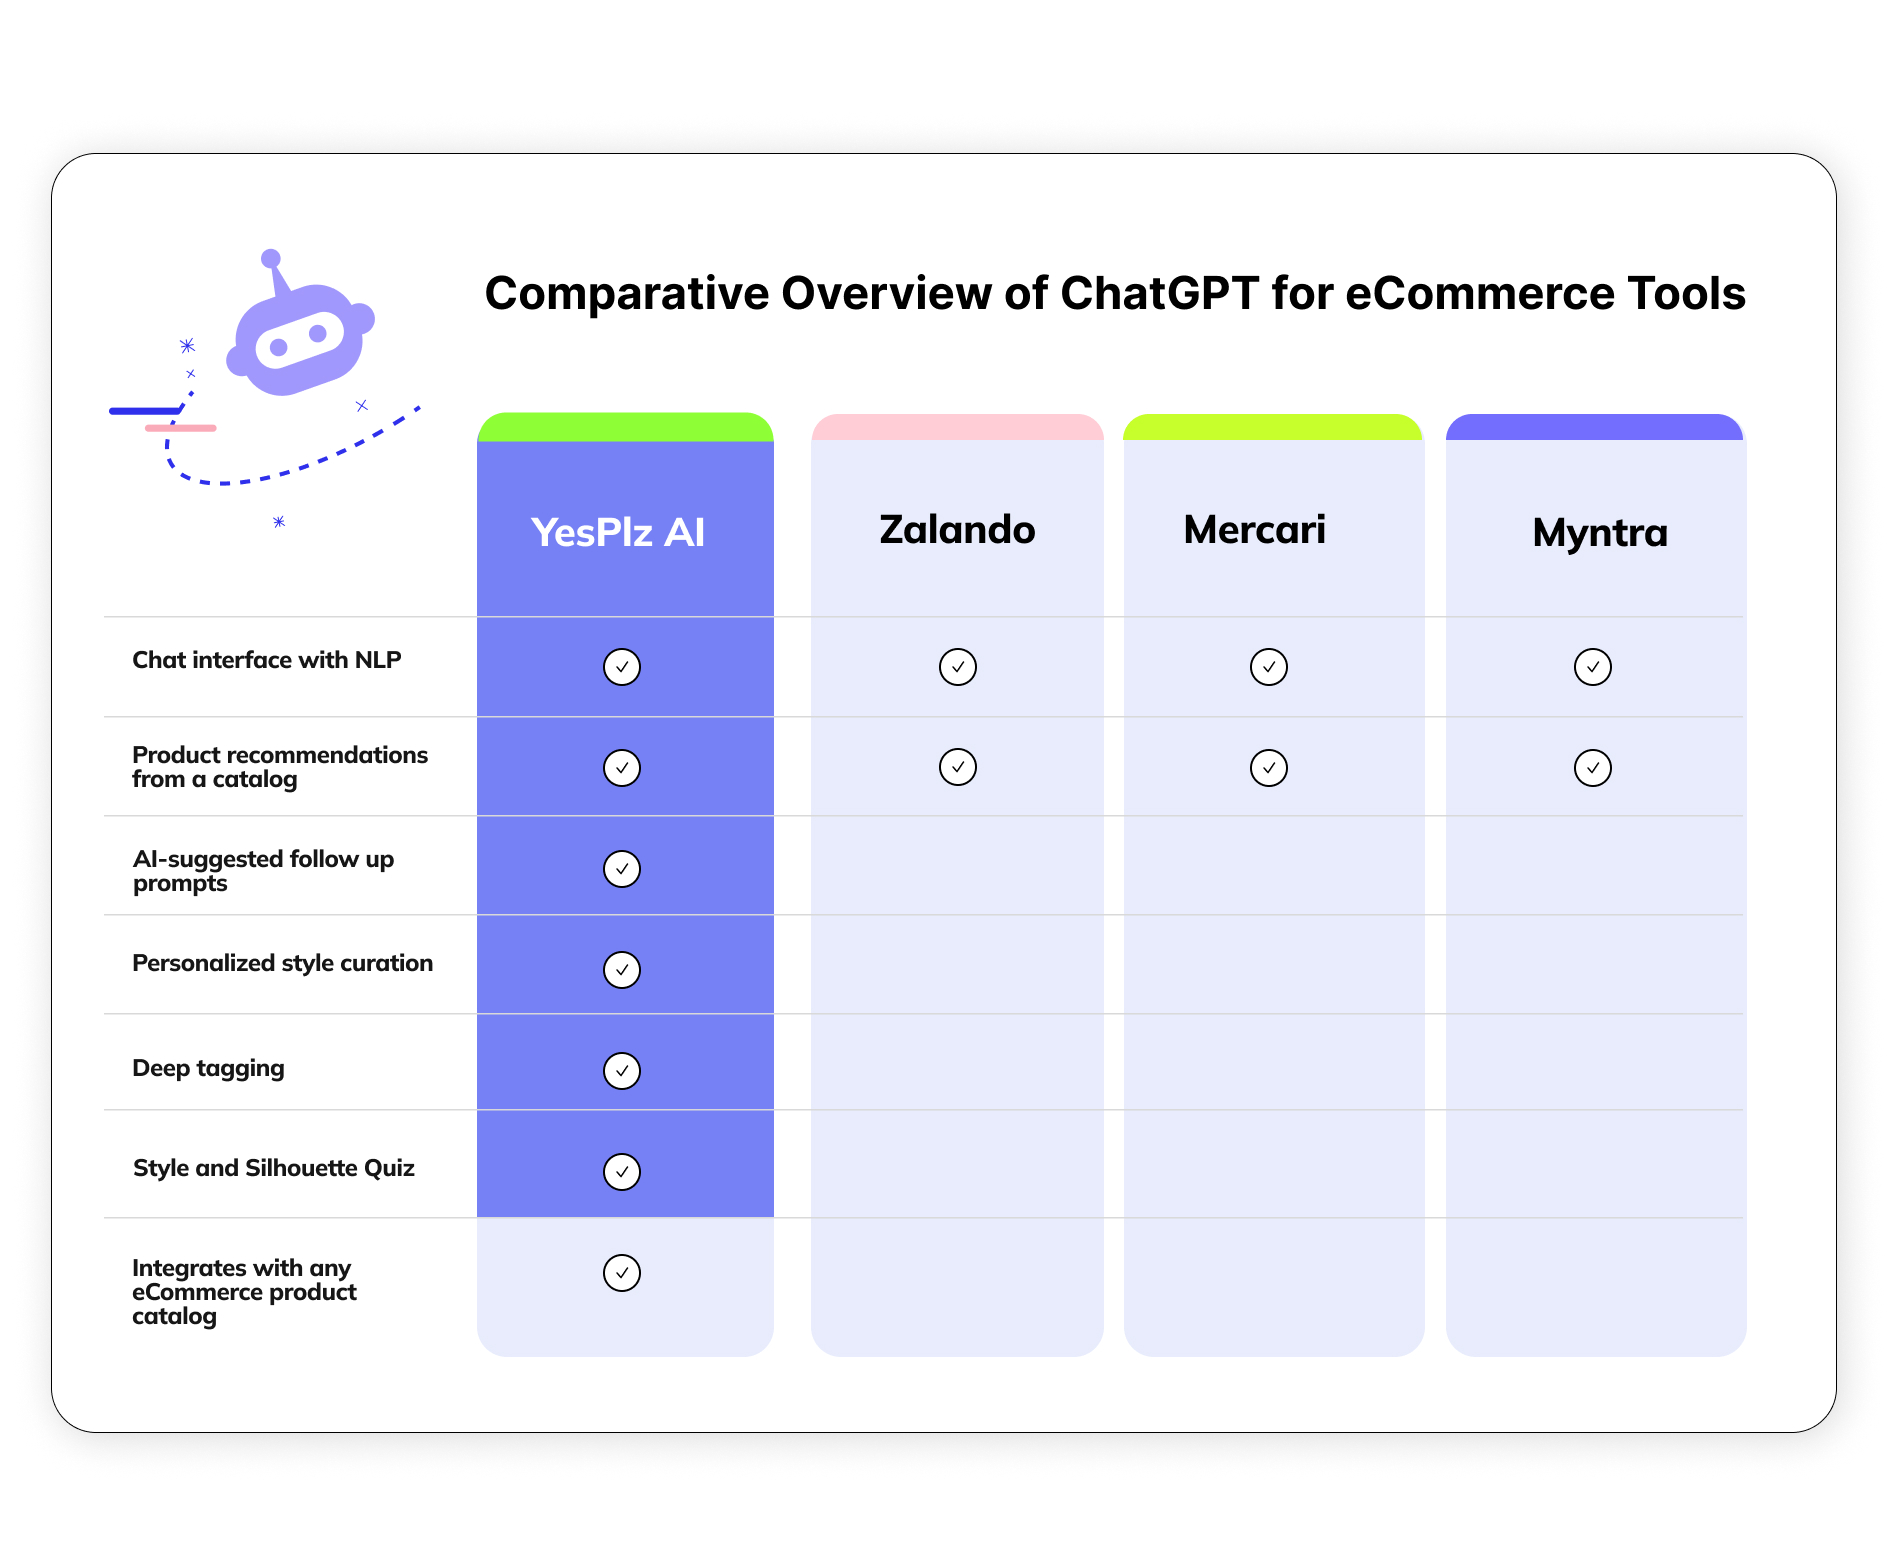 A comparative overview of different ChatGPT for fashion eCommerce tools